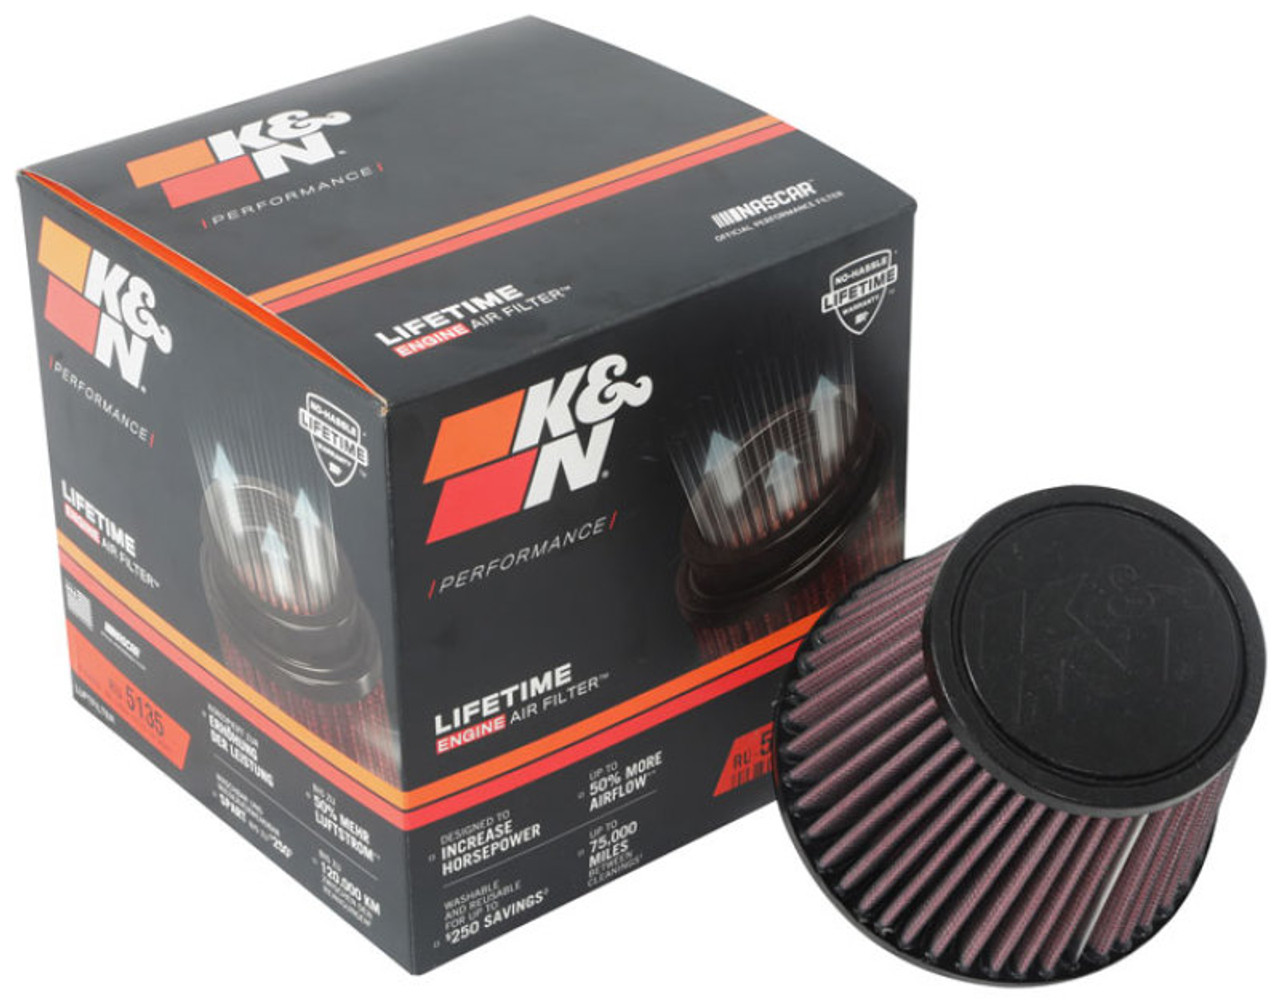 K&N Universal Clamp-On Air Filter 2-3/4in FLG / 5-1/16in B / 3-1/2in T / 4-3/8in H - RU-5135 Photo - out of package